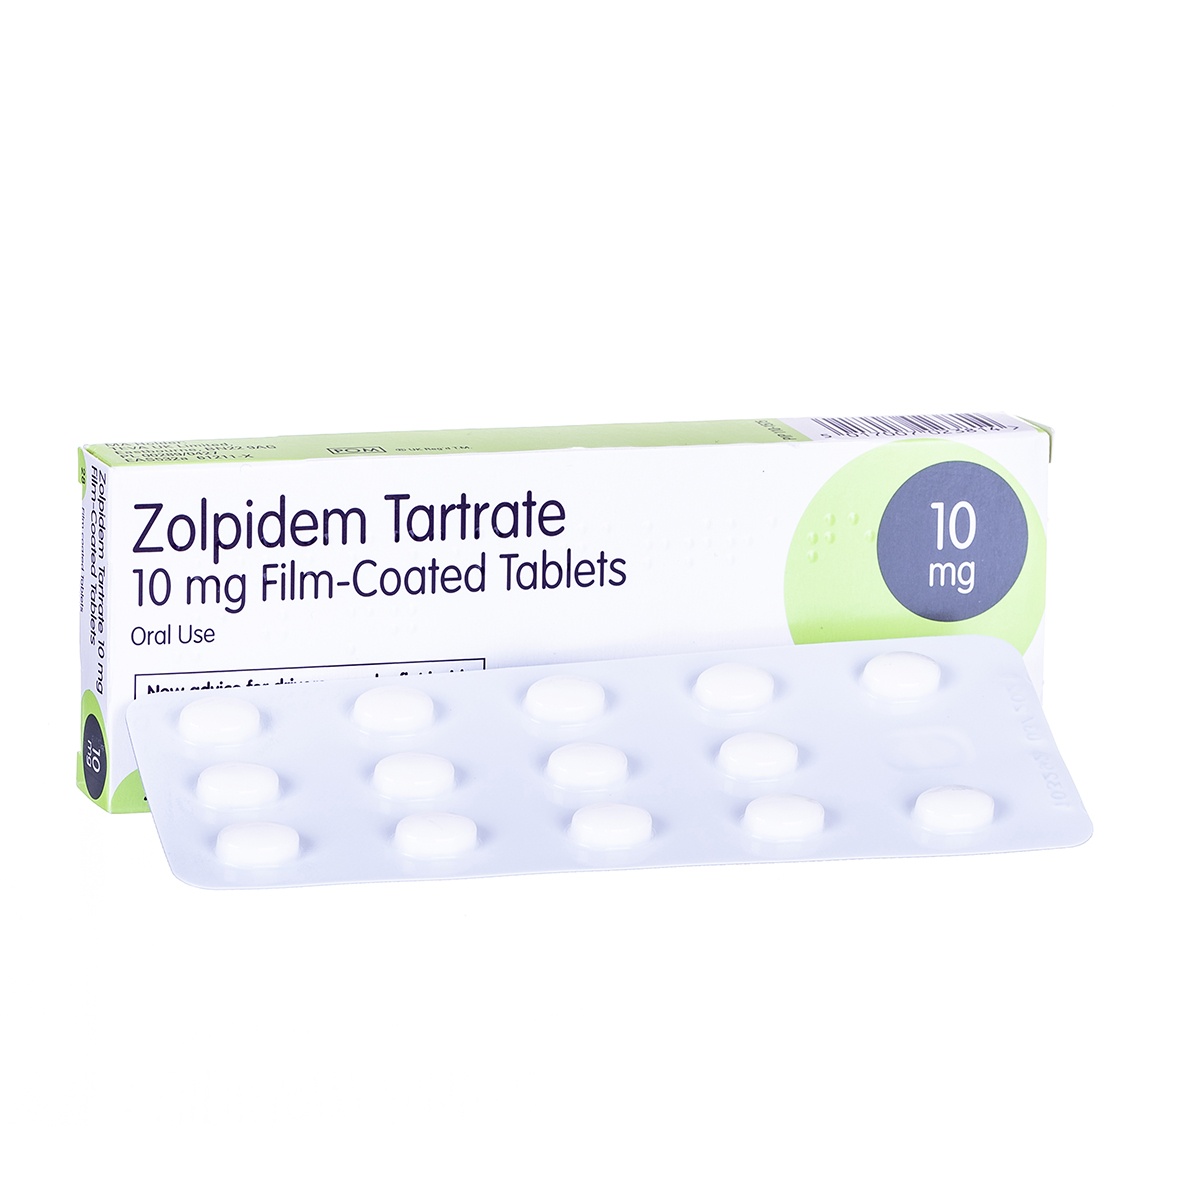 Are Zolpidem Tablets Really As Effective As People Say